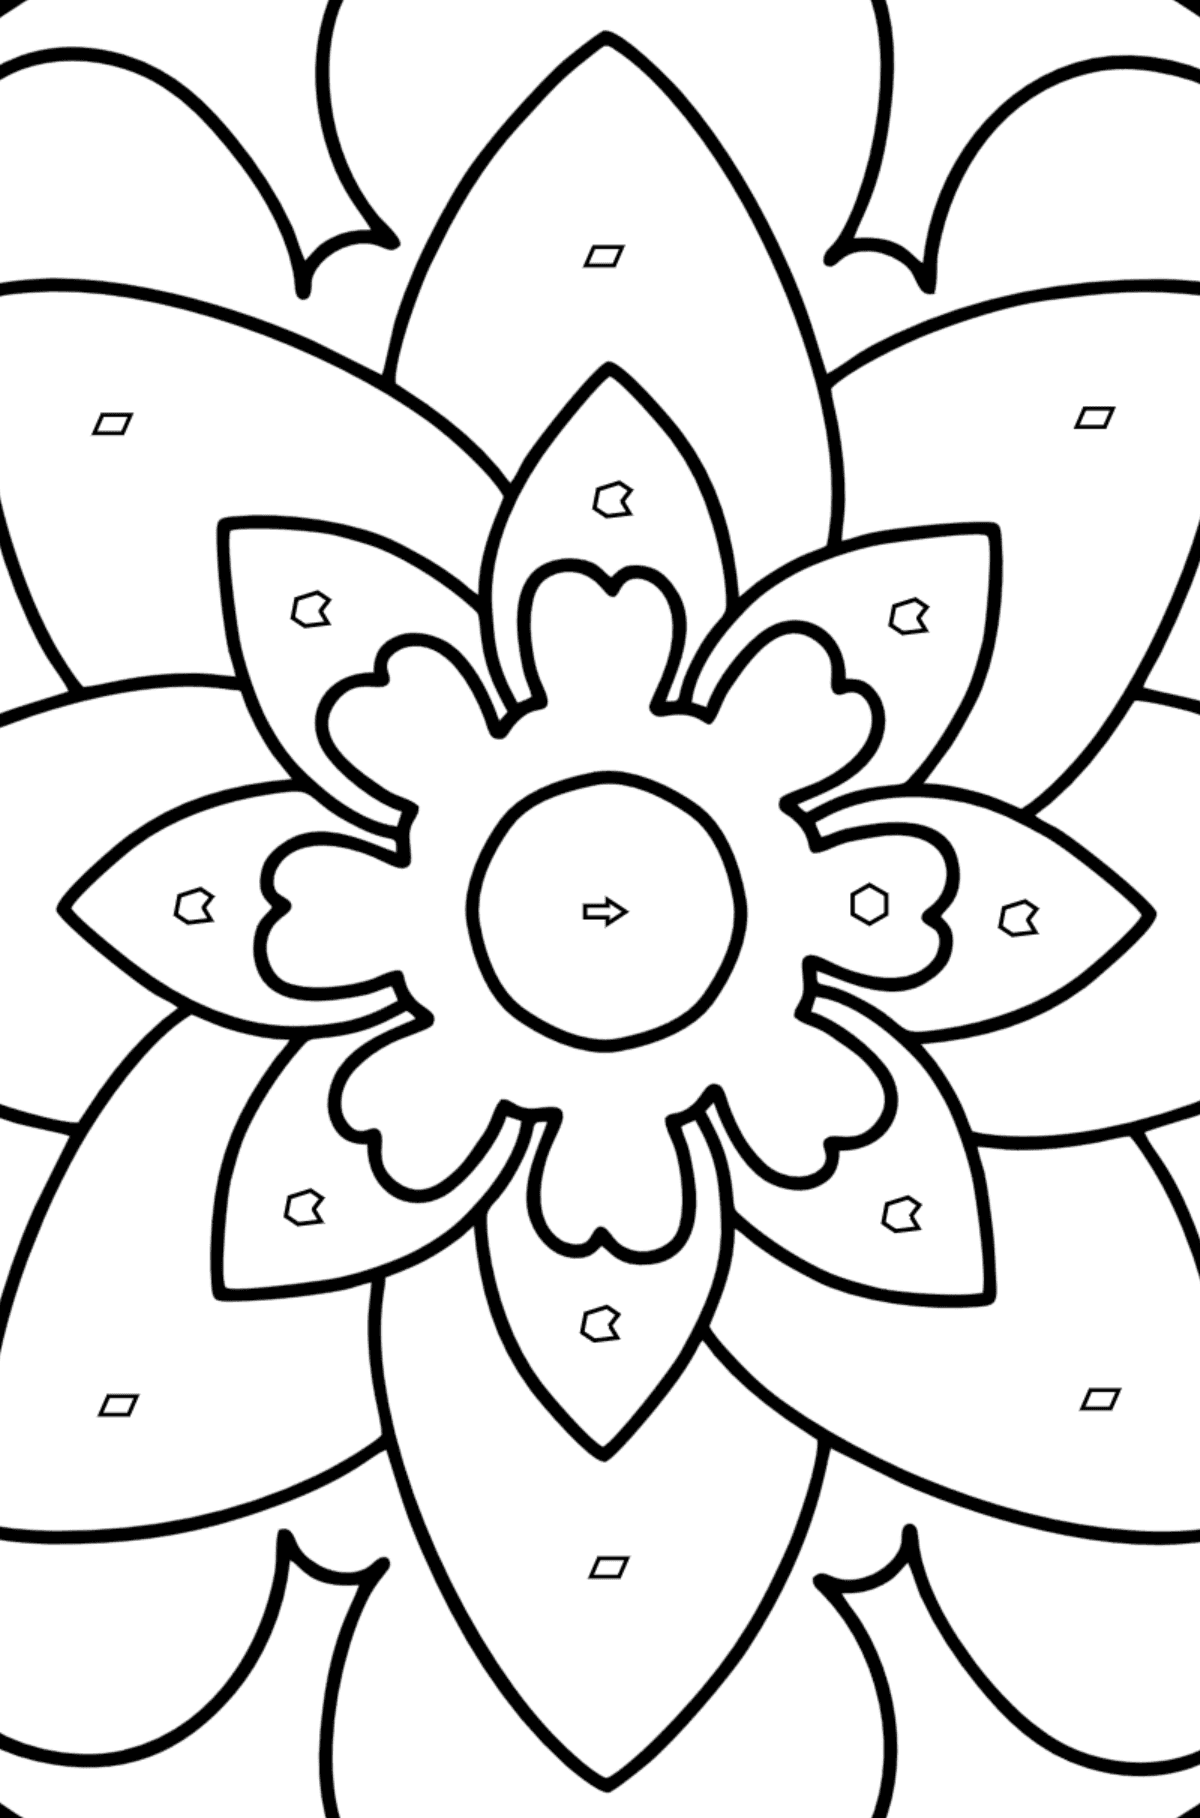 Mandala coloring page - 20 elements - Coloring by Geometric Shapes for Kids